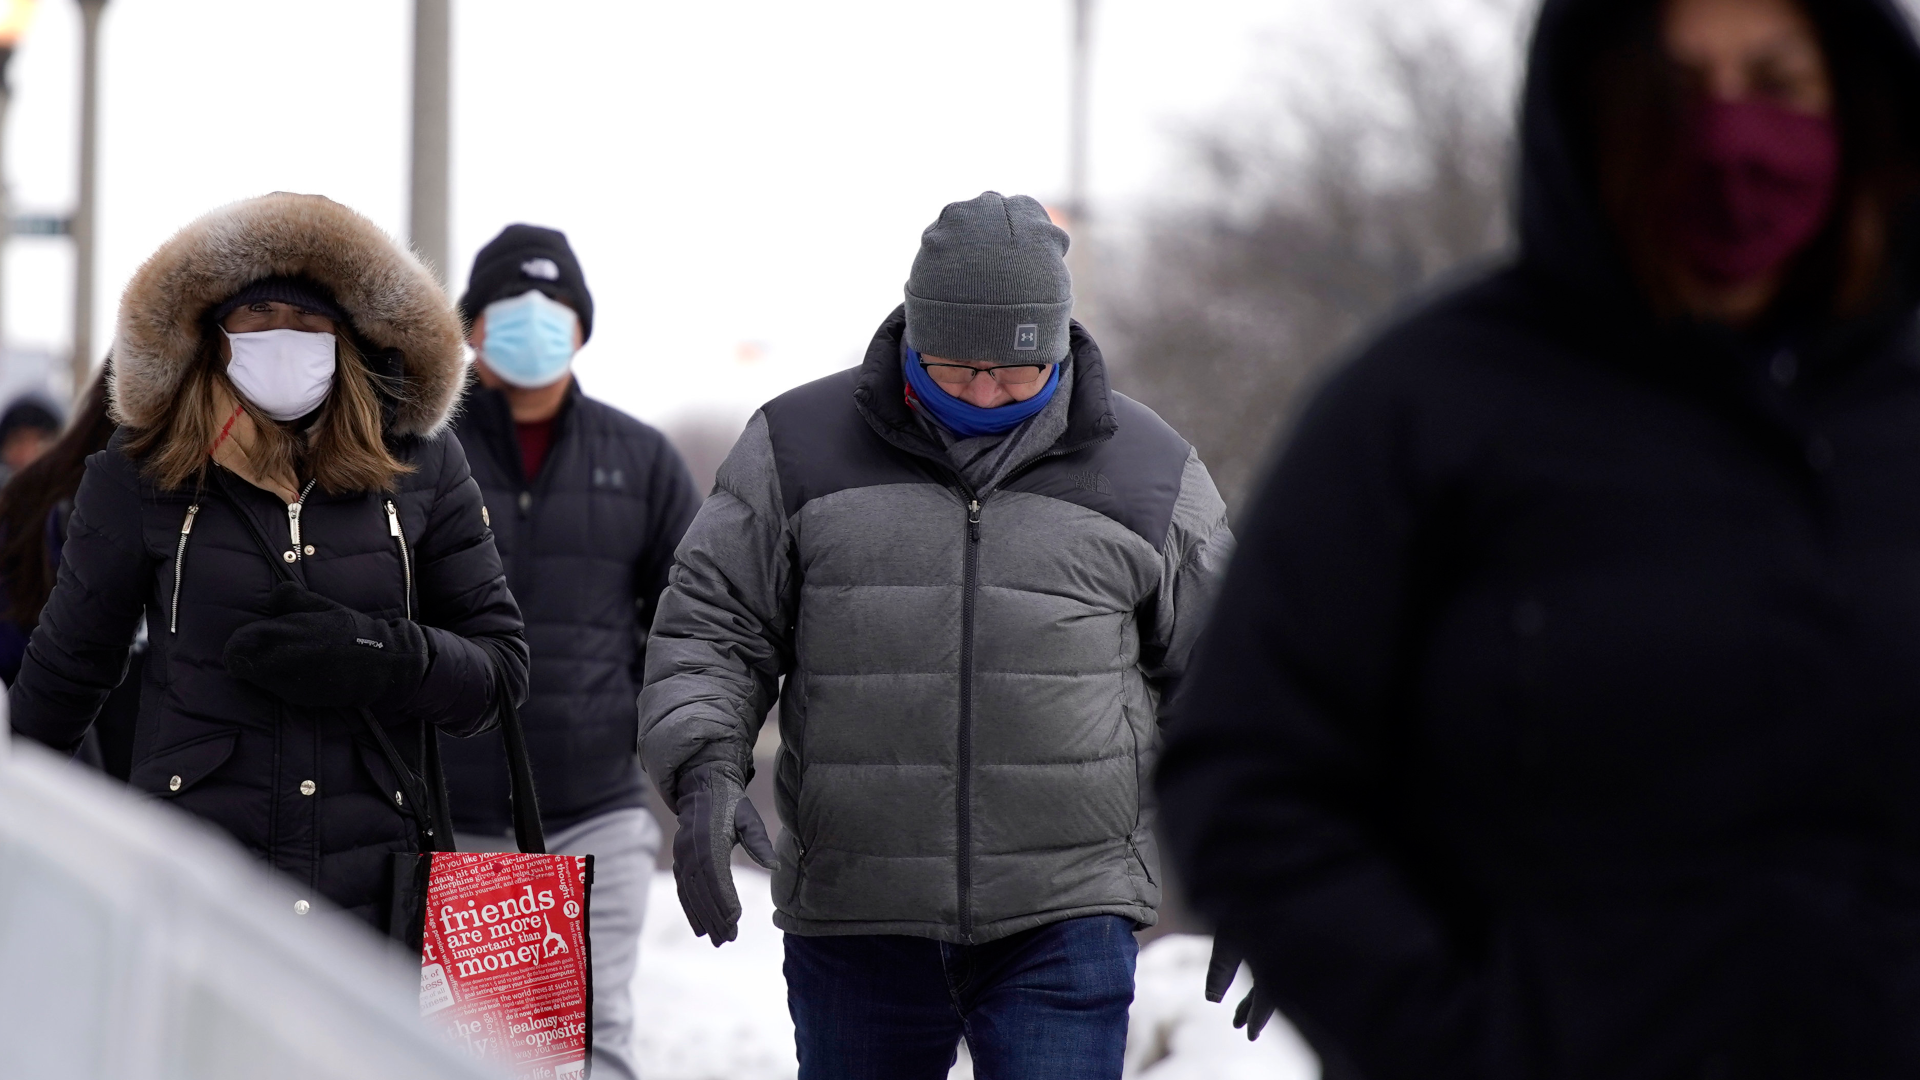 Weekend cold weather alert issued by medical officer for Hamilton area -  Hamilton